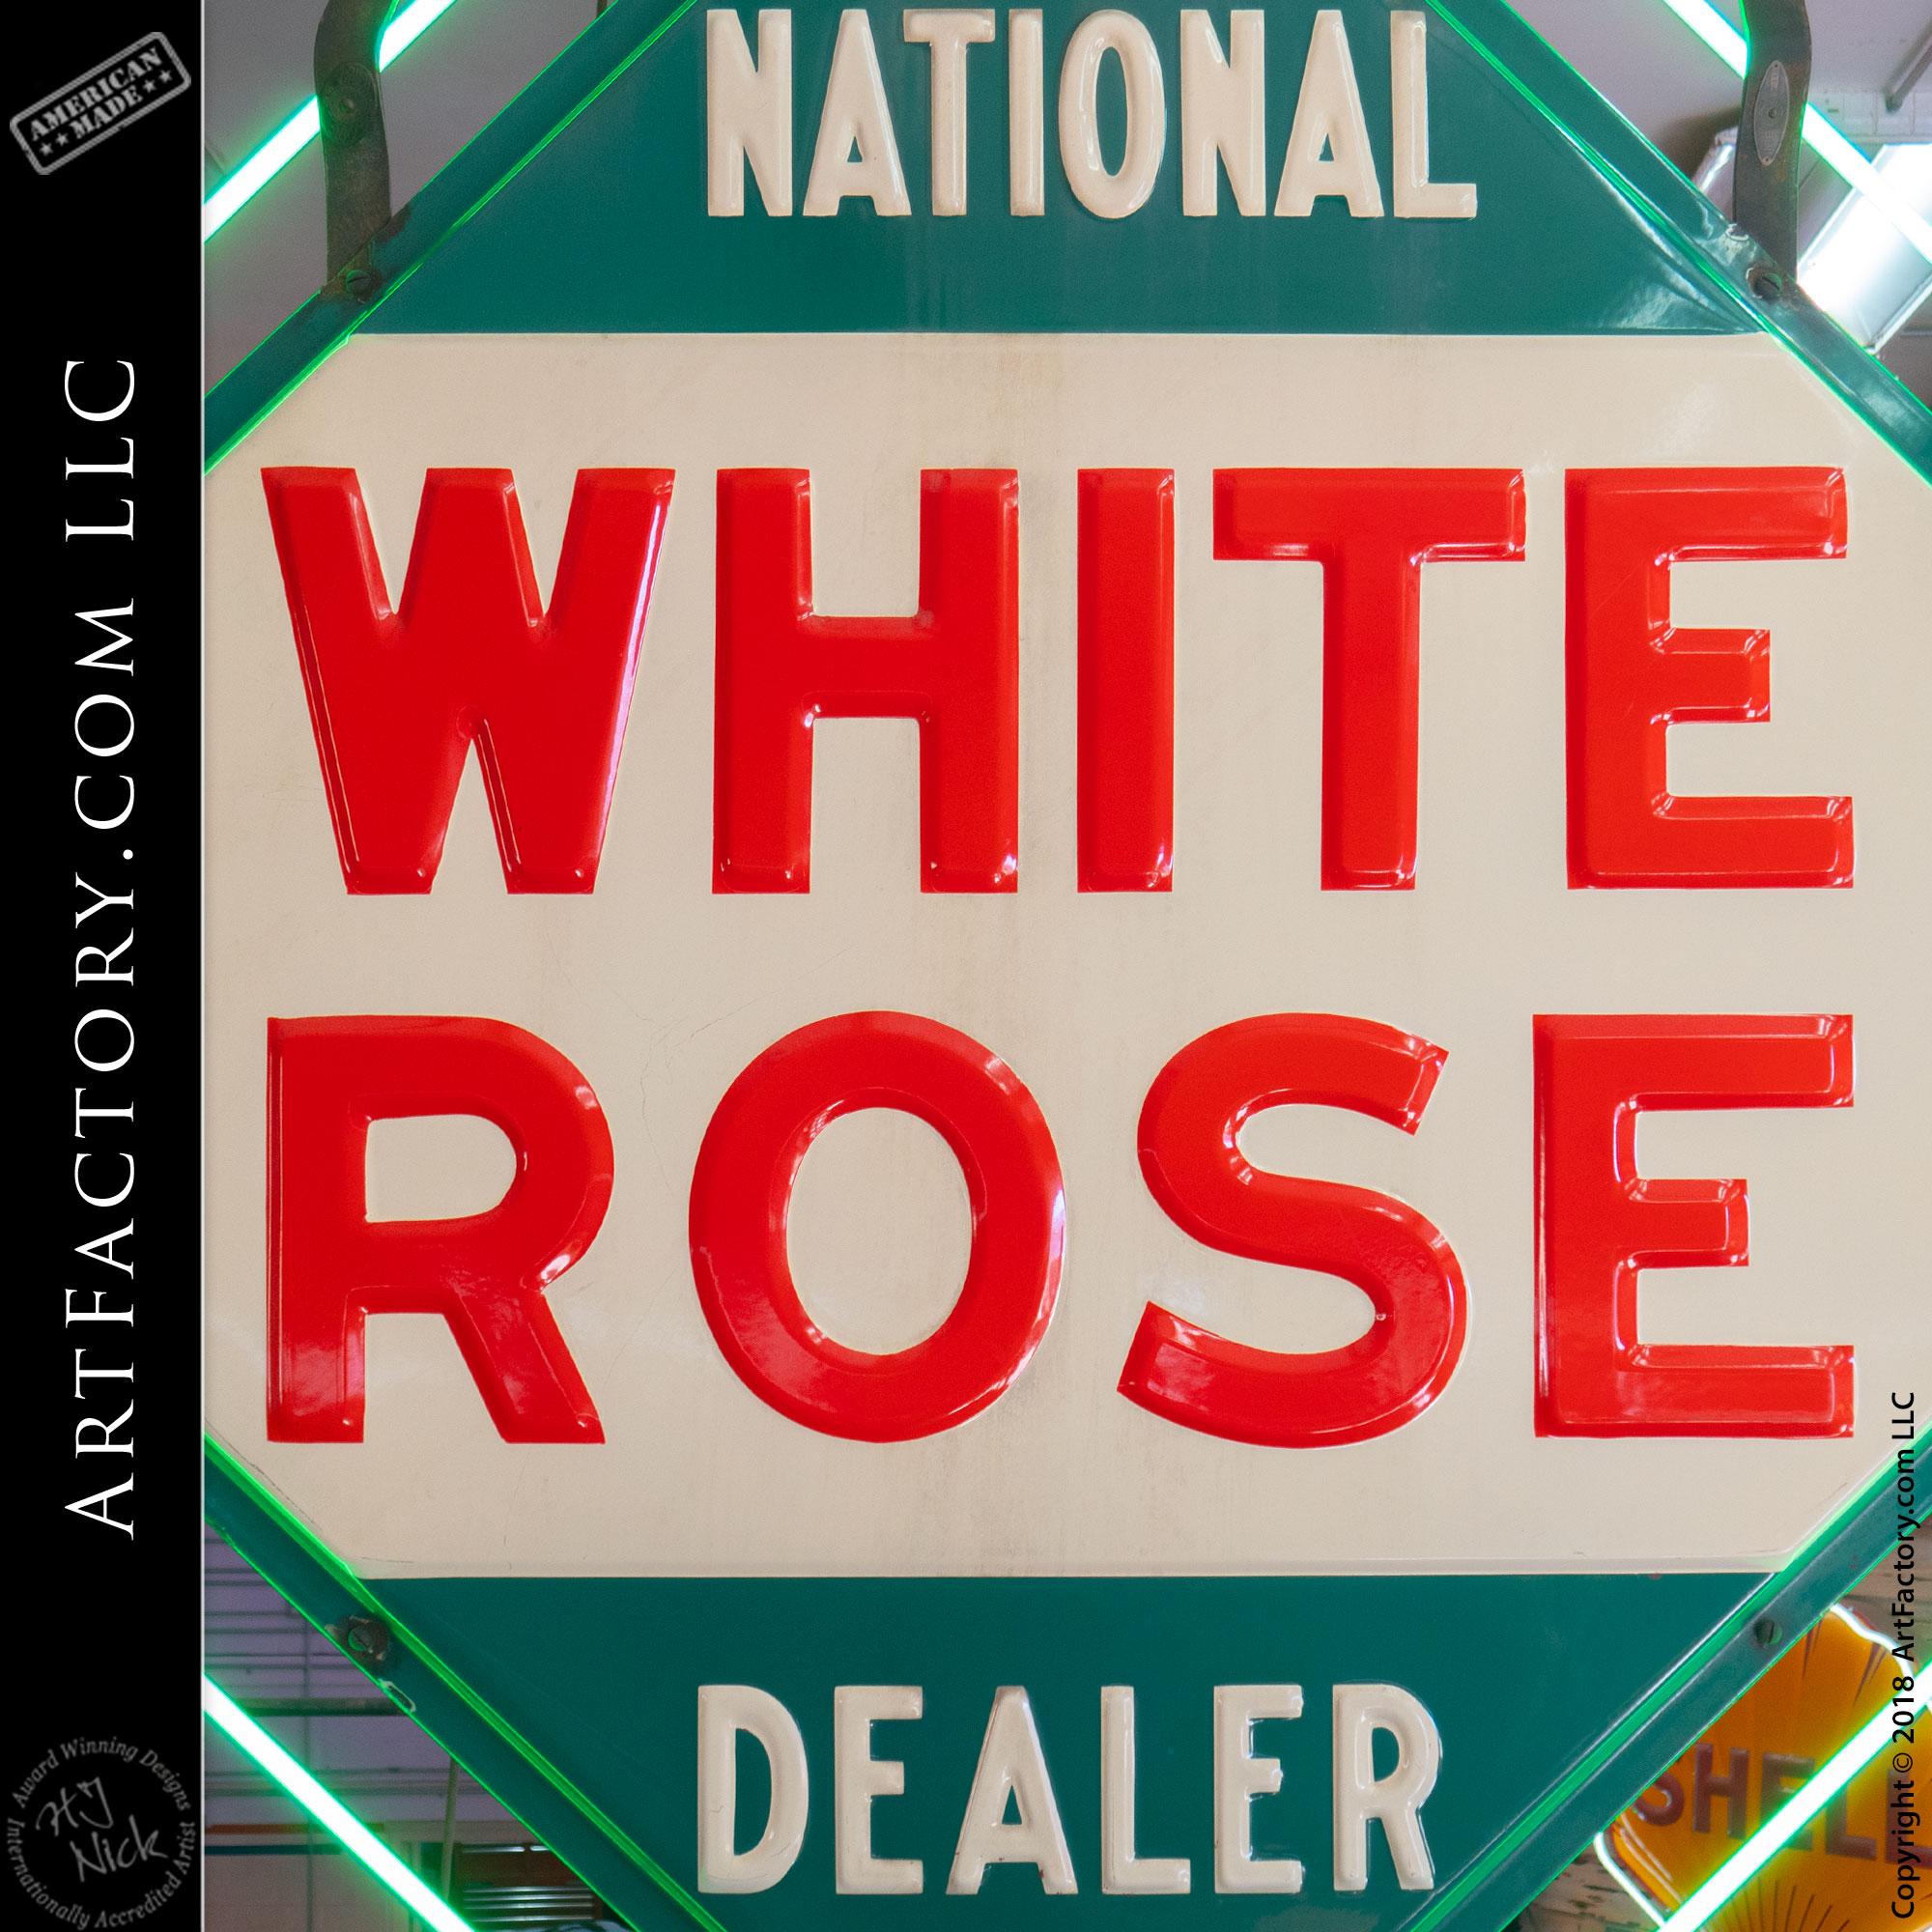 Vintage National White Rose Green Neon Sign